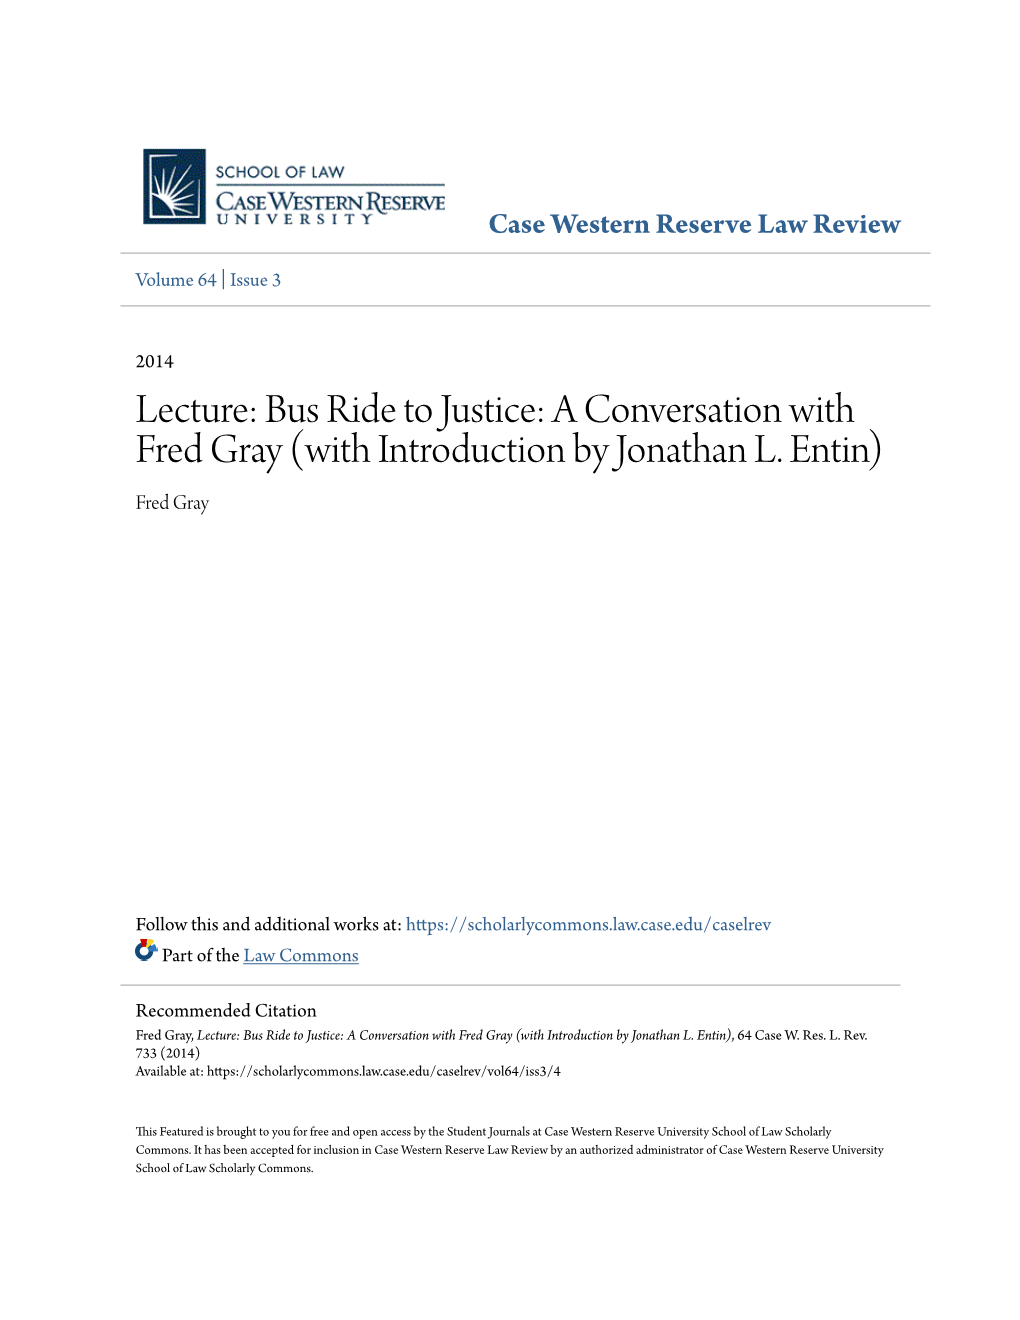 Bus Ride to Justice: a Conversation with Fred Gray (With Introduction by Jonathan L